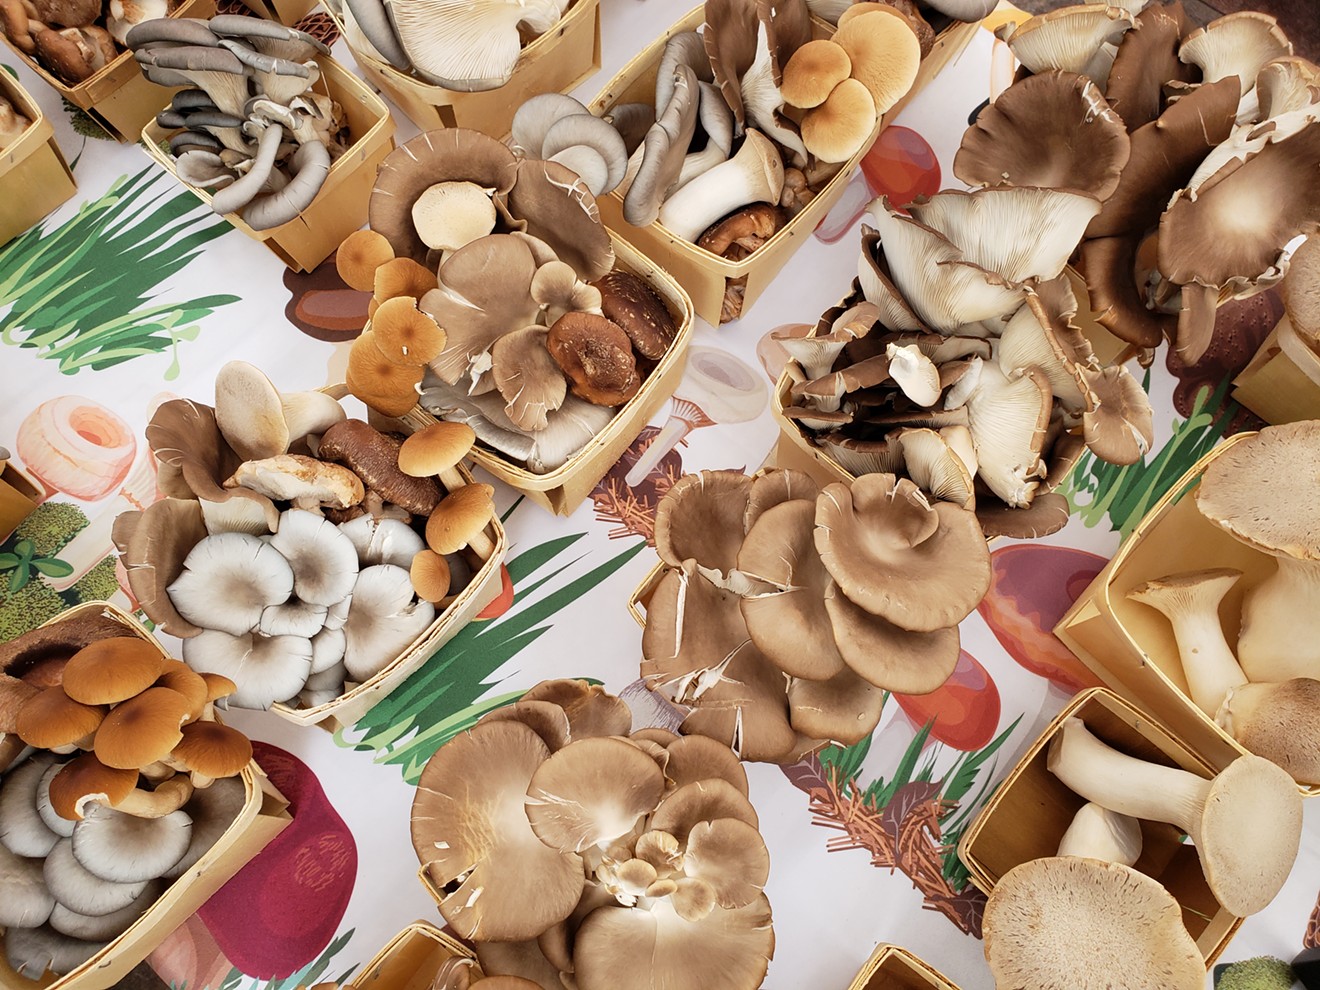 Mile High Fungi sells a wide variety of gourmet mushrooms.